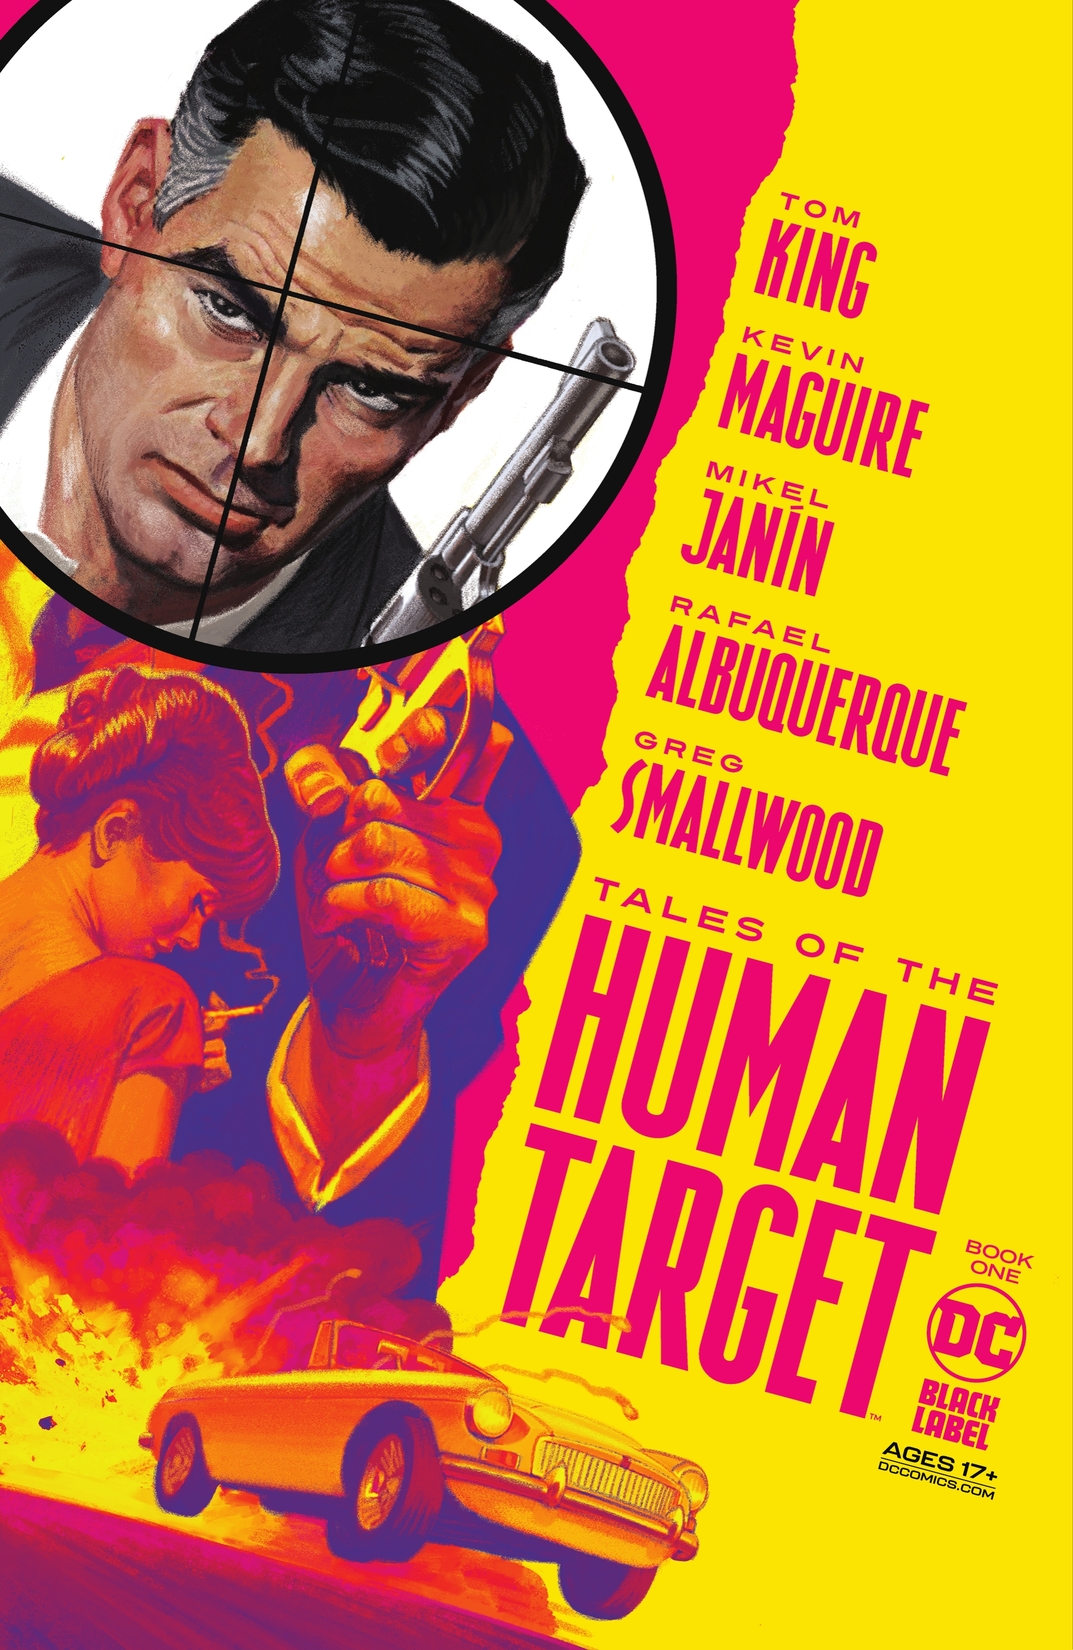 Tales of the Human Target - #0001 preview images